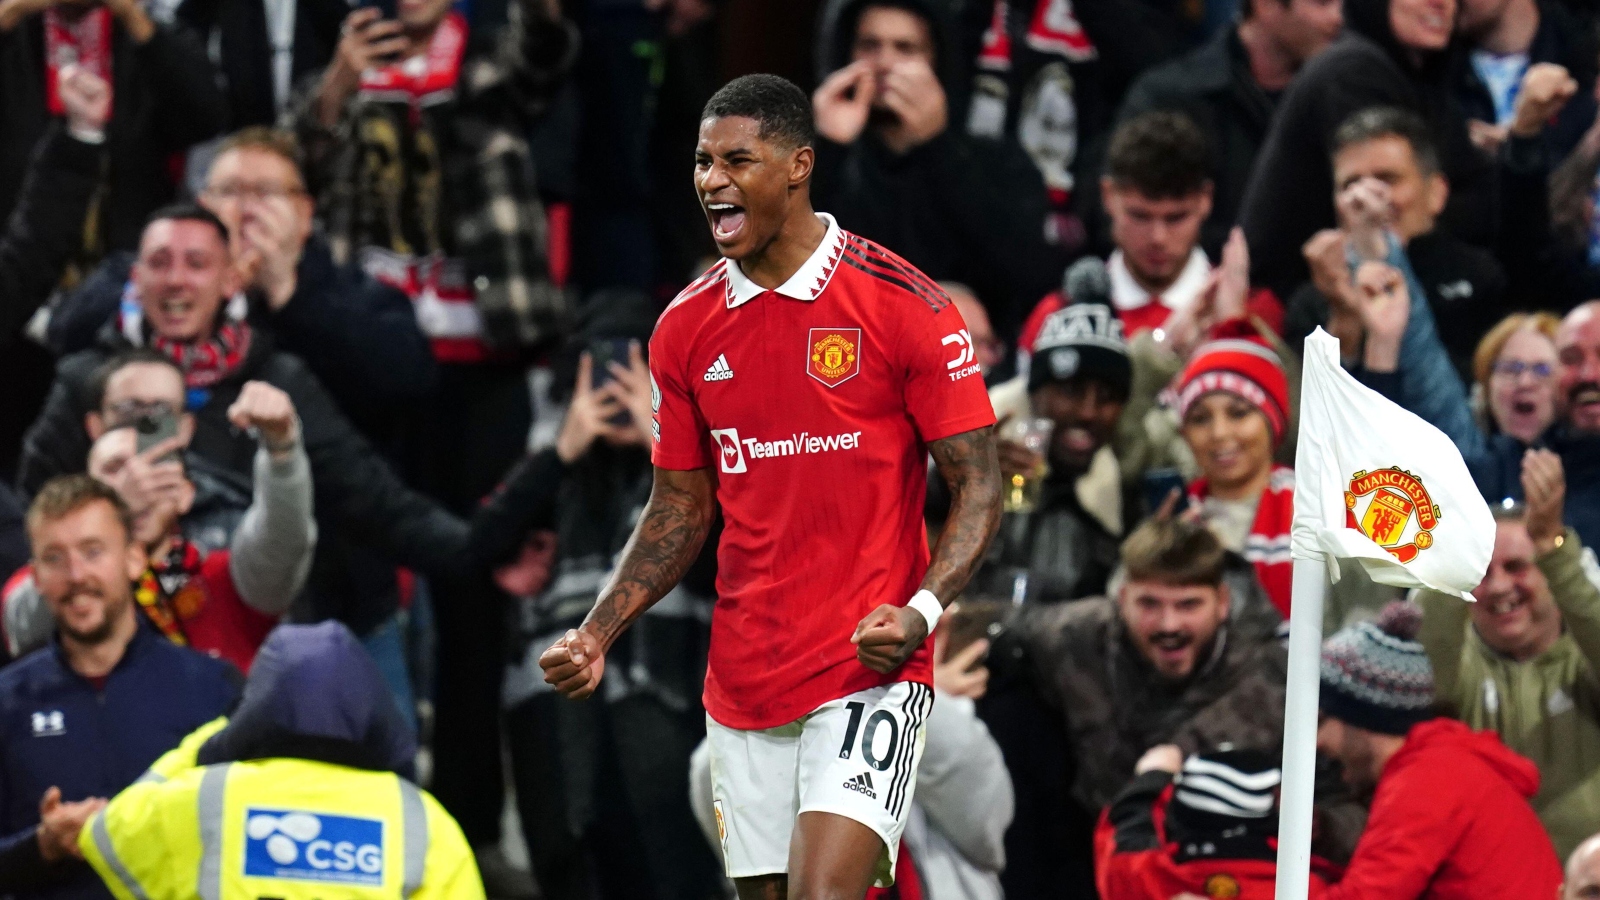 Gary Neville says Marcus Rashford is now a ‘different player’ after Manchester United beat West Ham - Bóng Đá